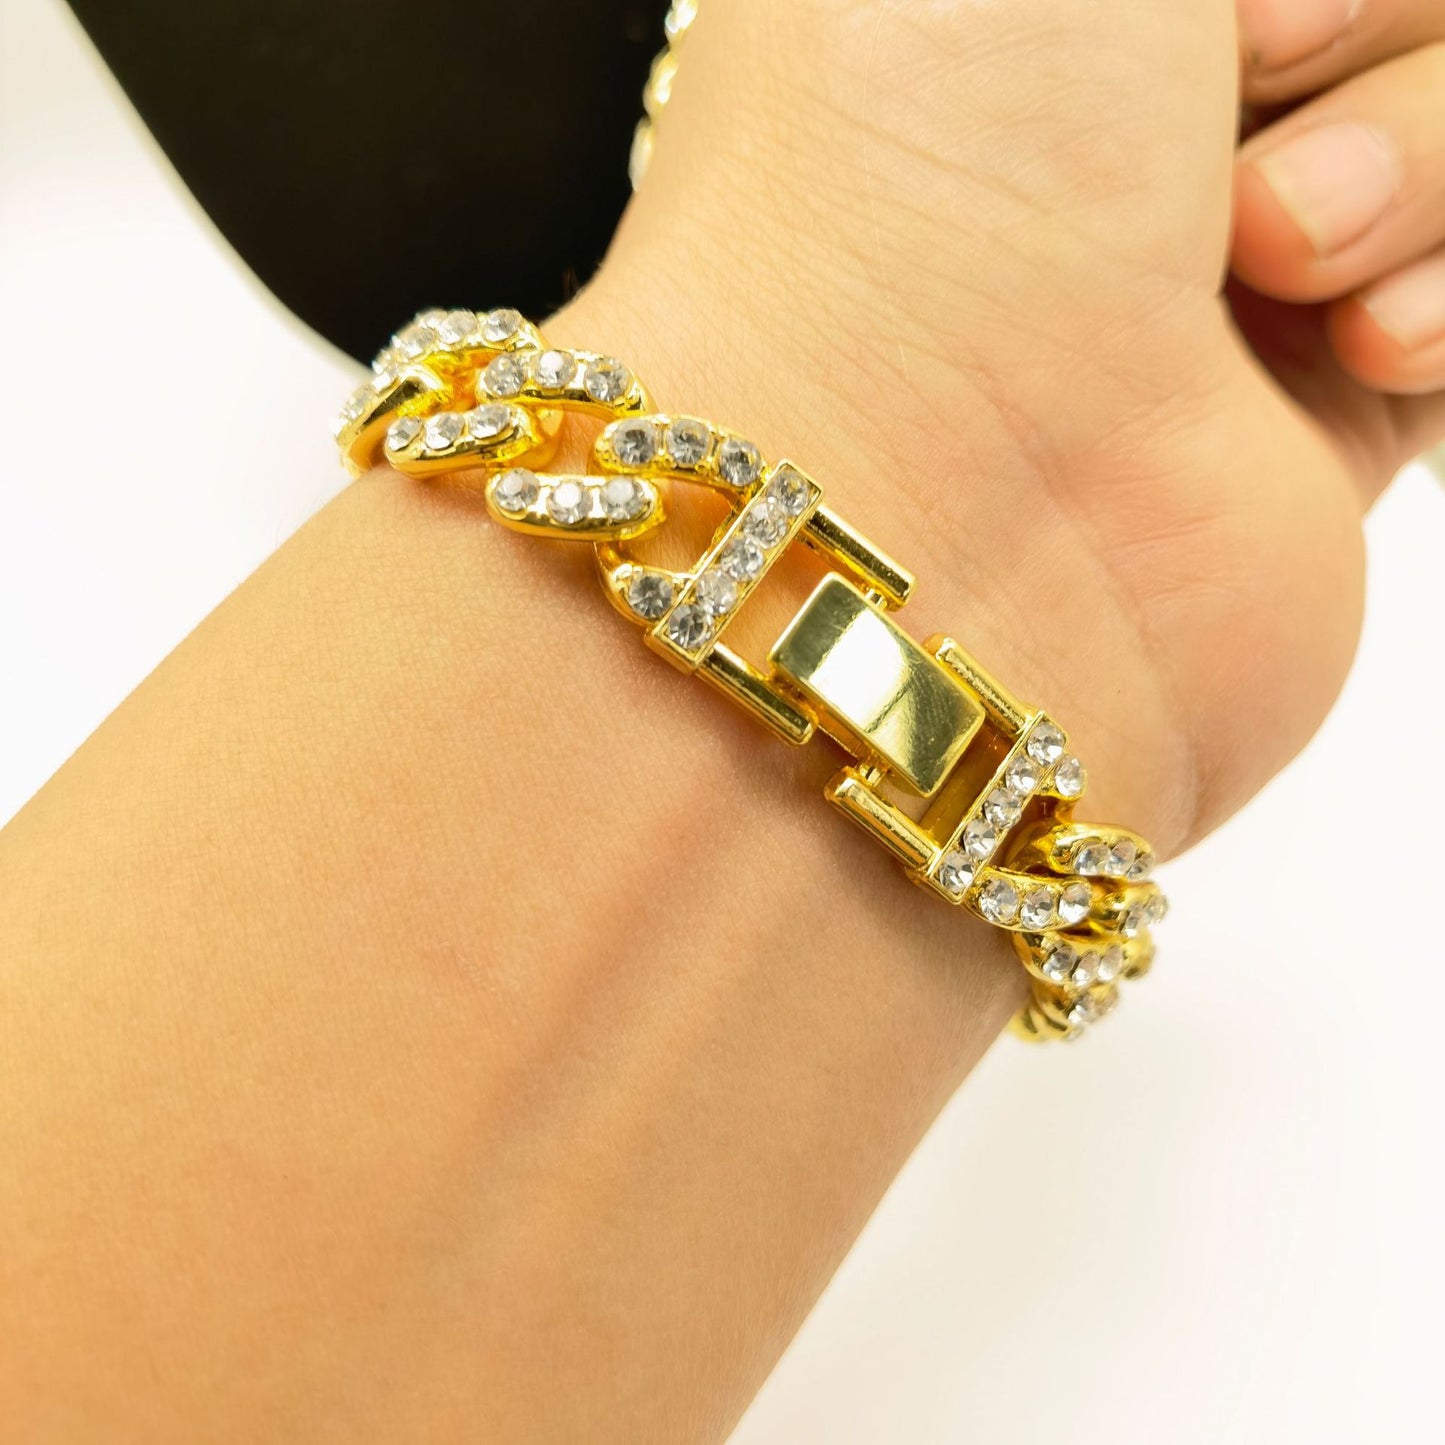 a woman's arm with a gold and diamond bracelet